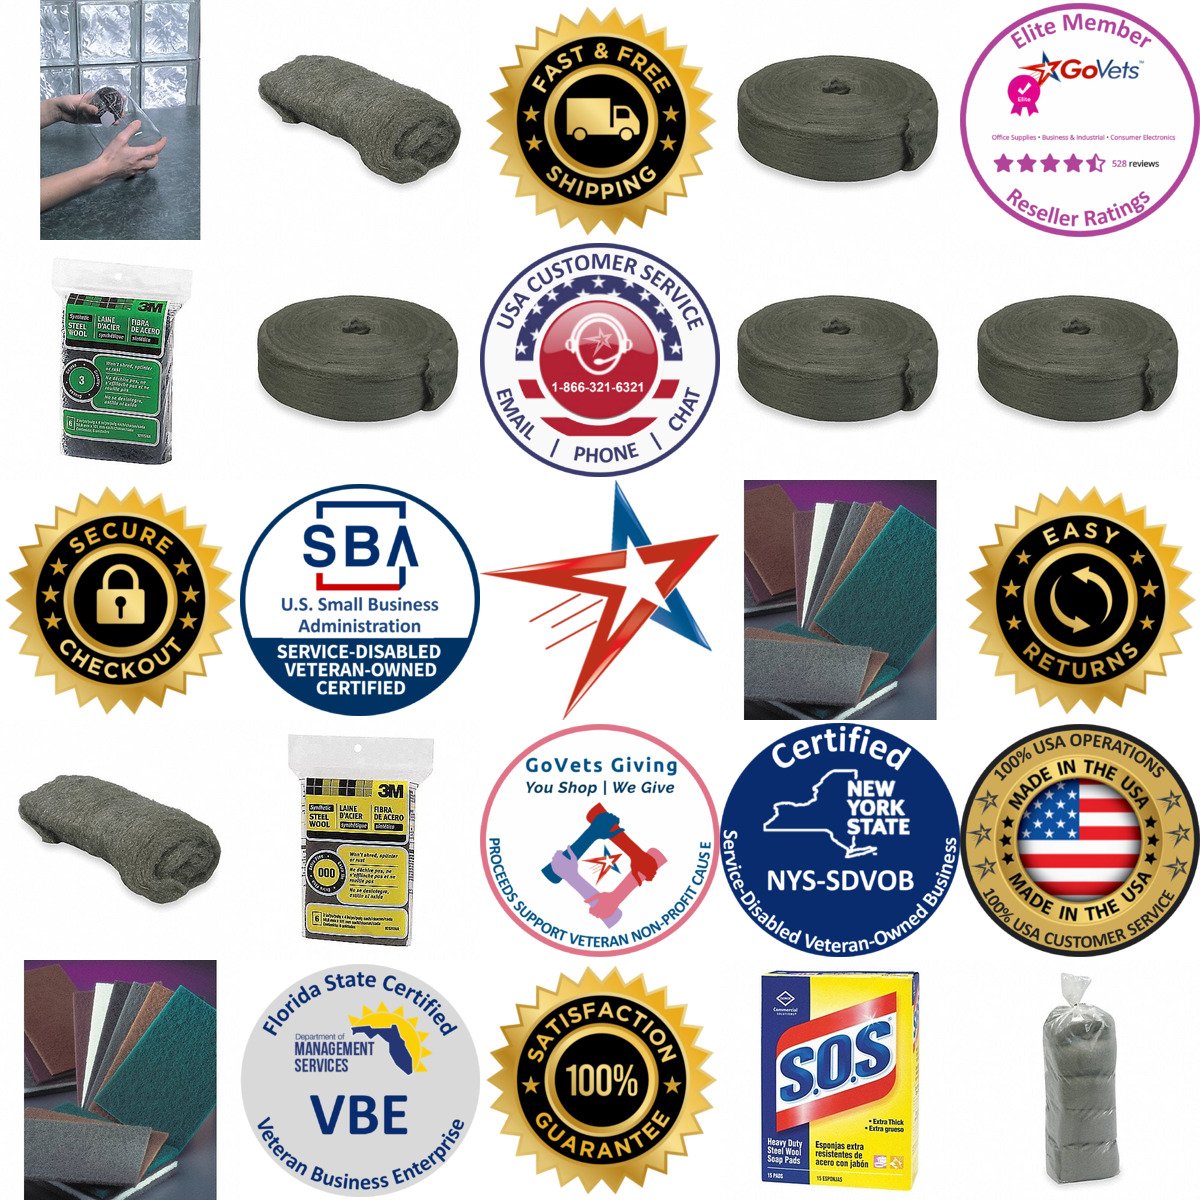 A selection of Steel Wool products on GoVets